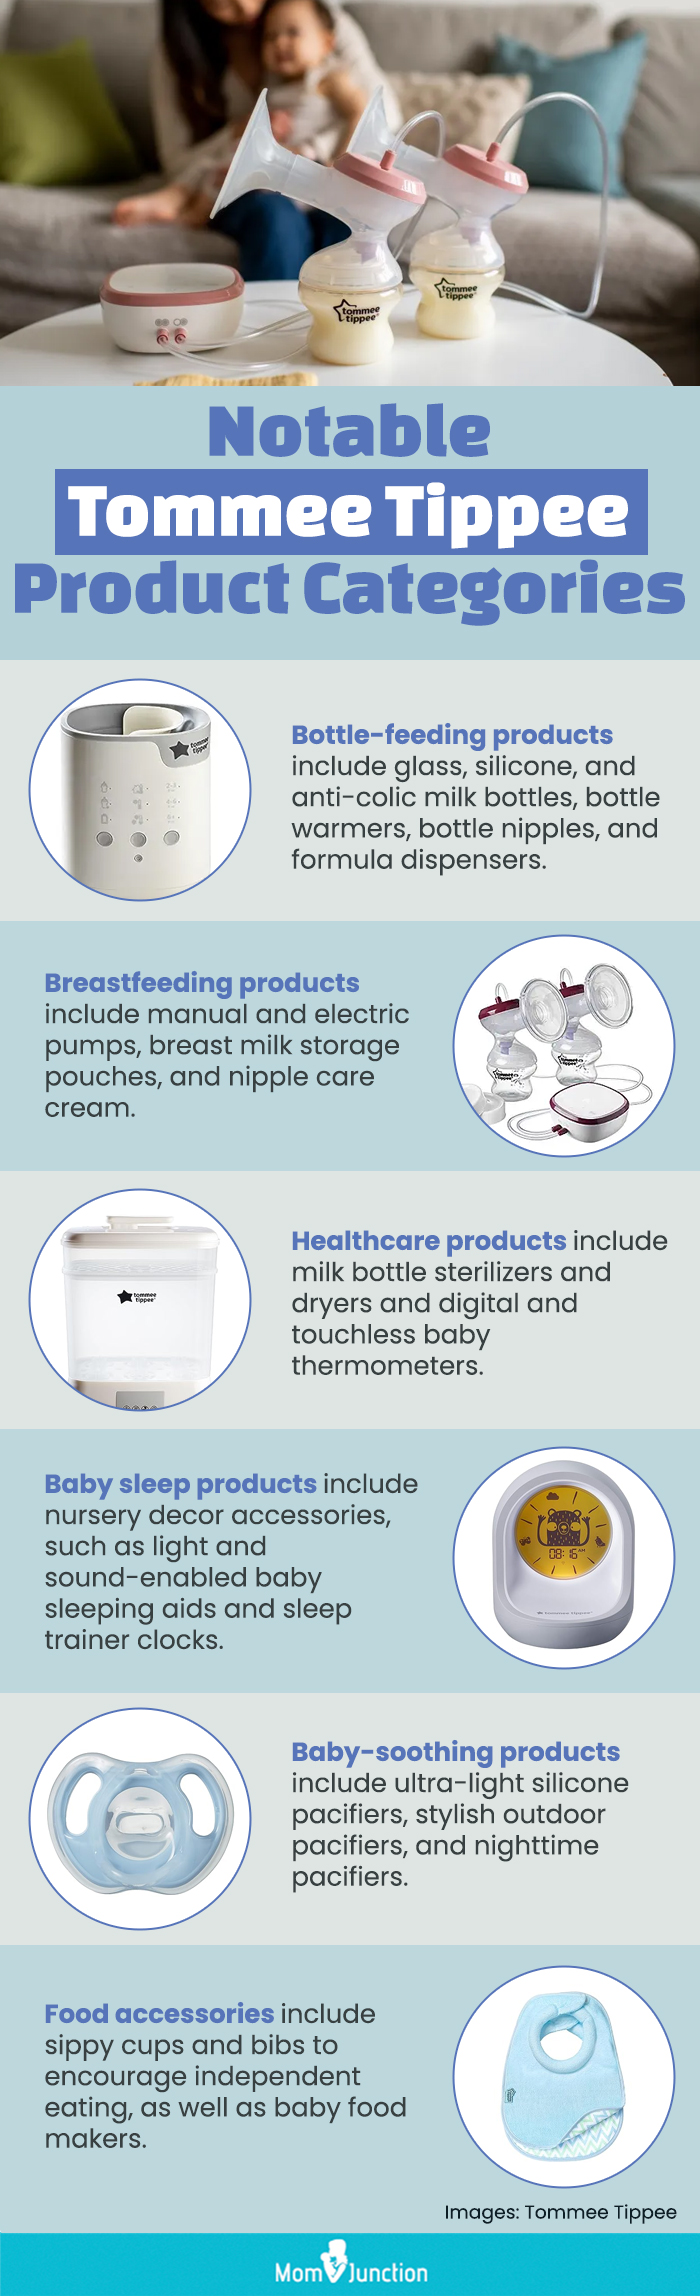 Notable Tommee Tippee Product Categories (infographic)